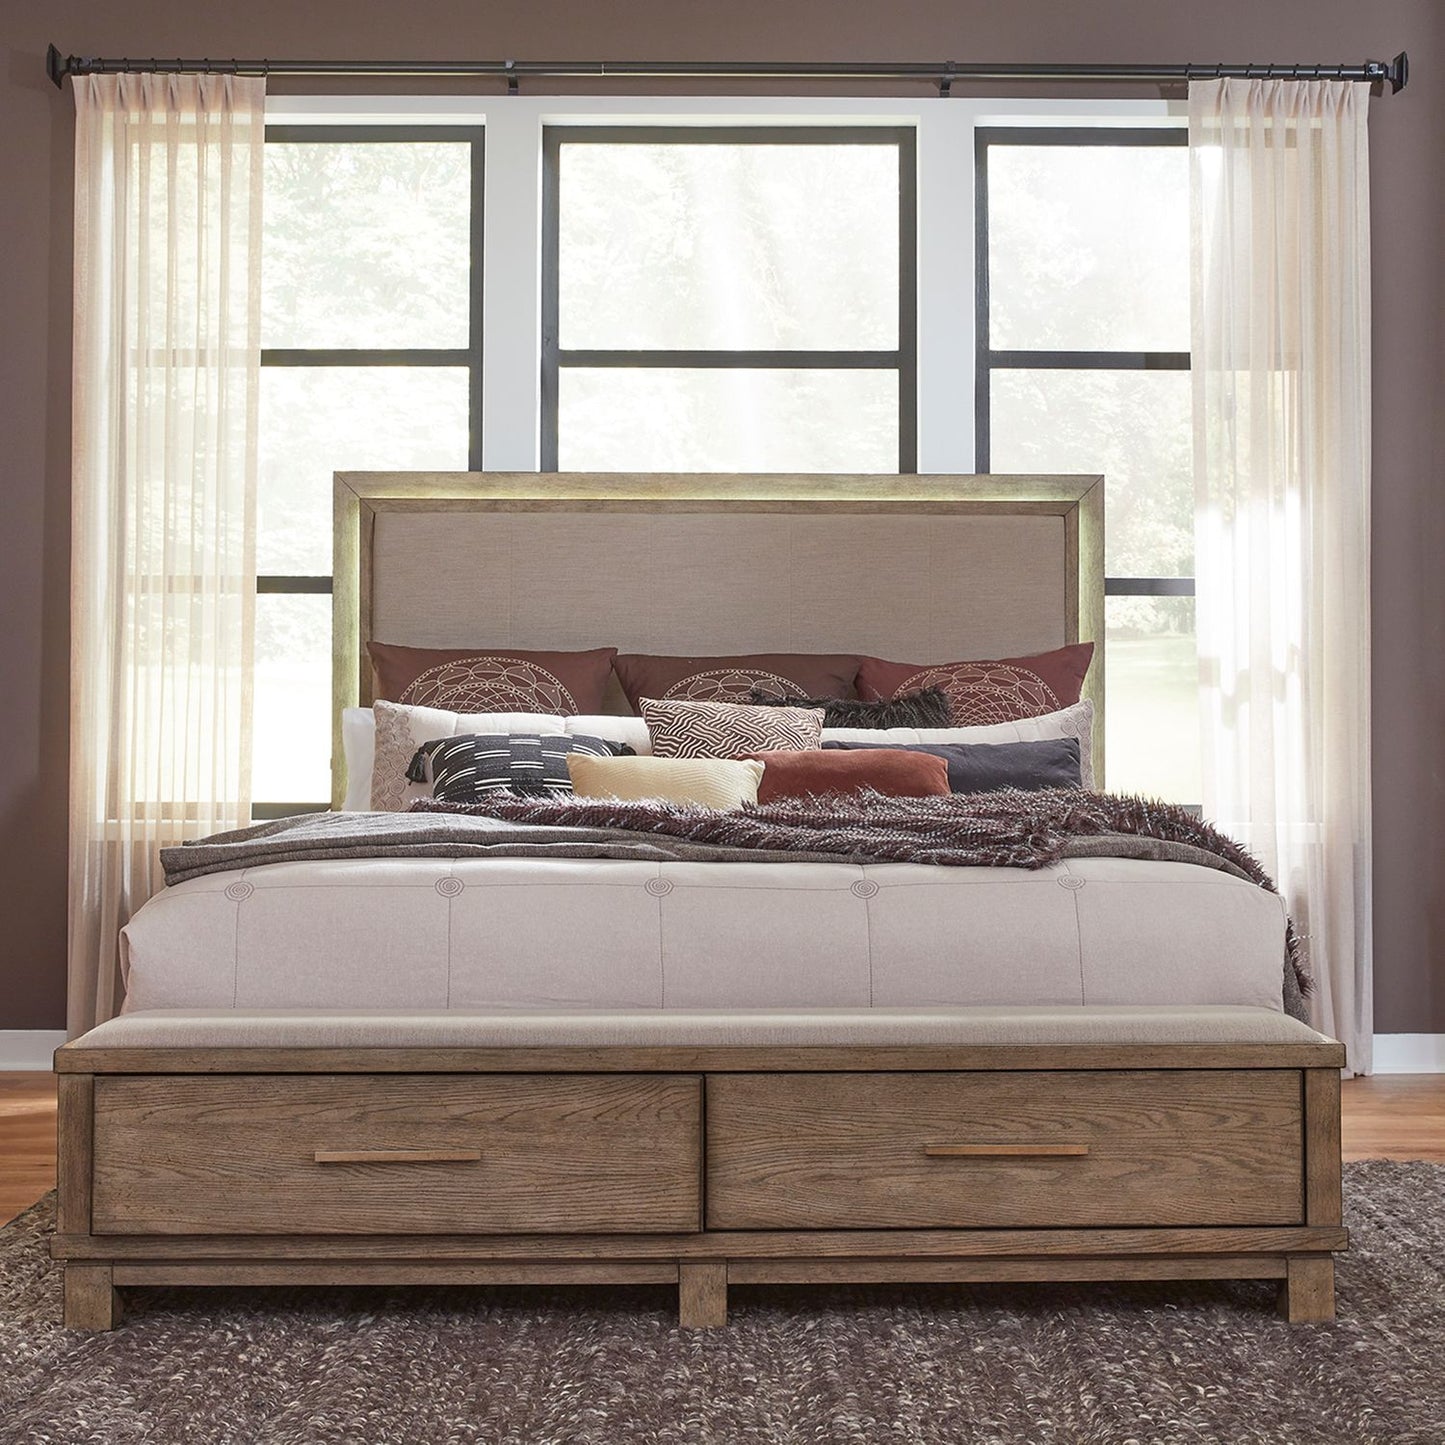 Canyon Road - King Storage Bed, Dresser & Mirror, Chest, Night Stand